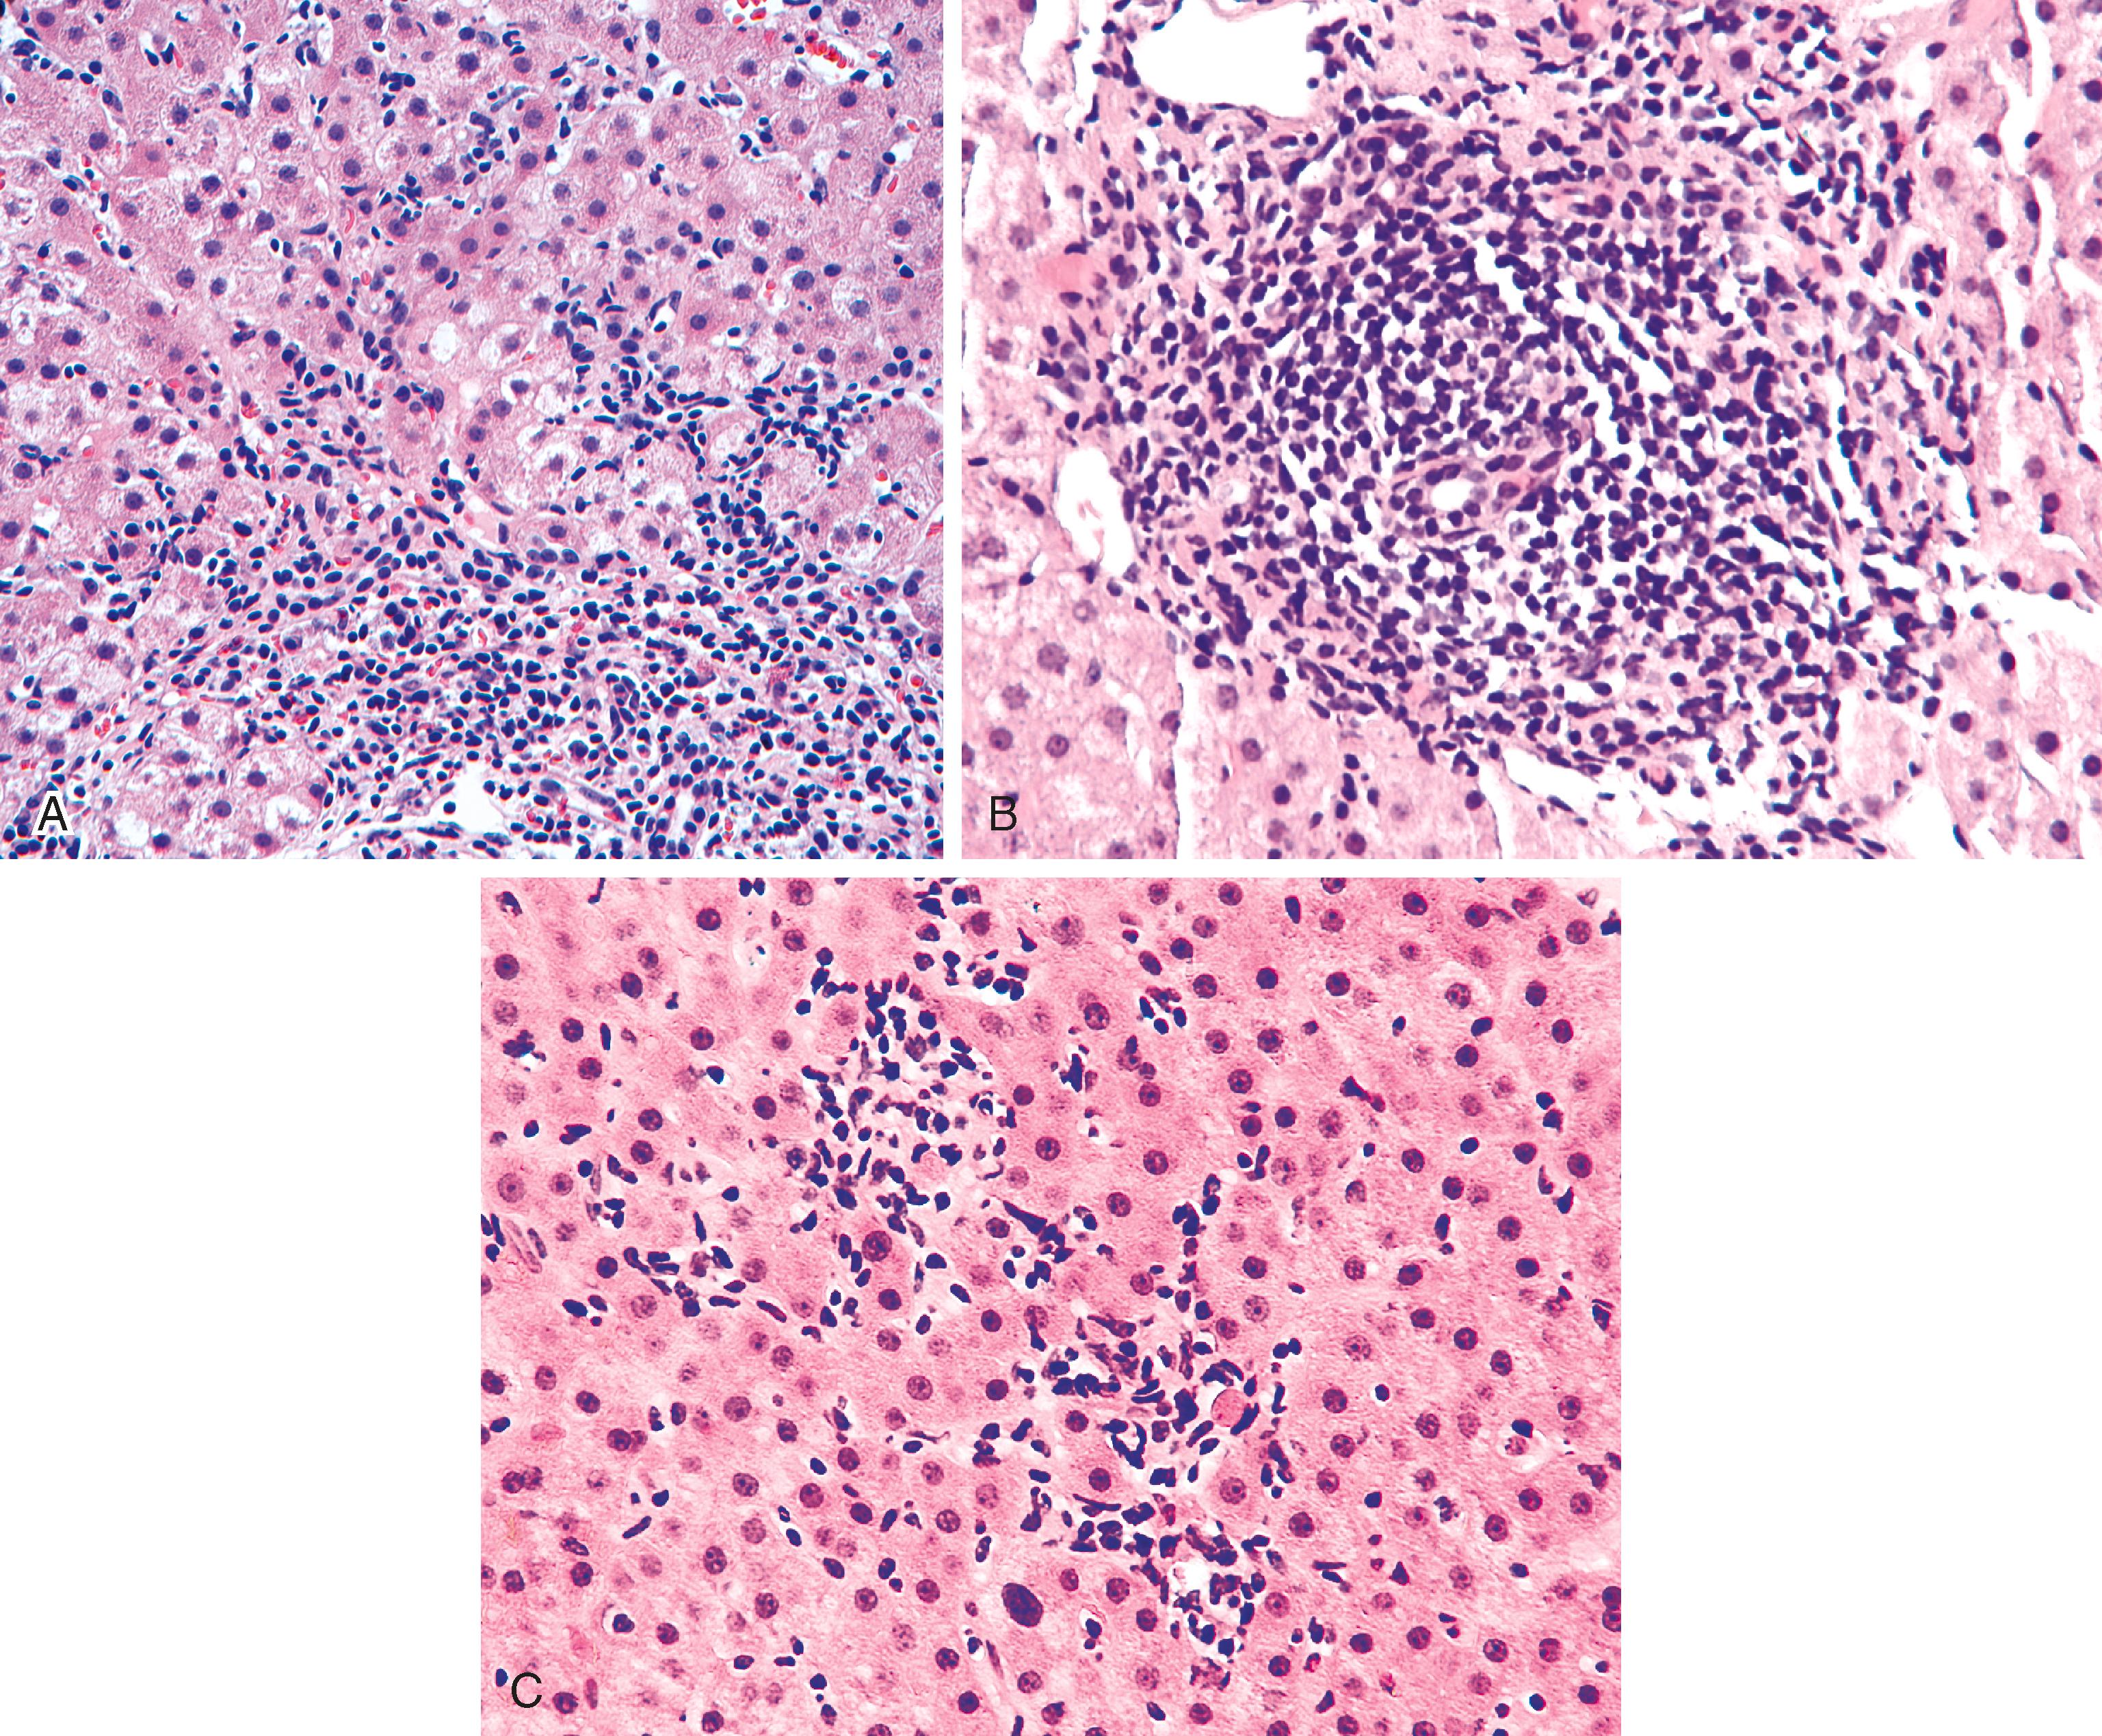 FIGURE 43.3, A, Chronic hepatitis B showing interphase activity. The inflammation extends from the portal tract beyond the limiting plate and into the adjacent parenchyma. B, Portal inflammation in chronic hepatitis B consists predominantly of lymphocytes surrounding an entrapped bile duct, which is mostly intact. C, A variable amount of lobular inflammation associated with hepatocyte damage is also usually present in chronic hepatitis.